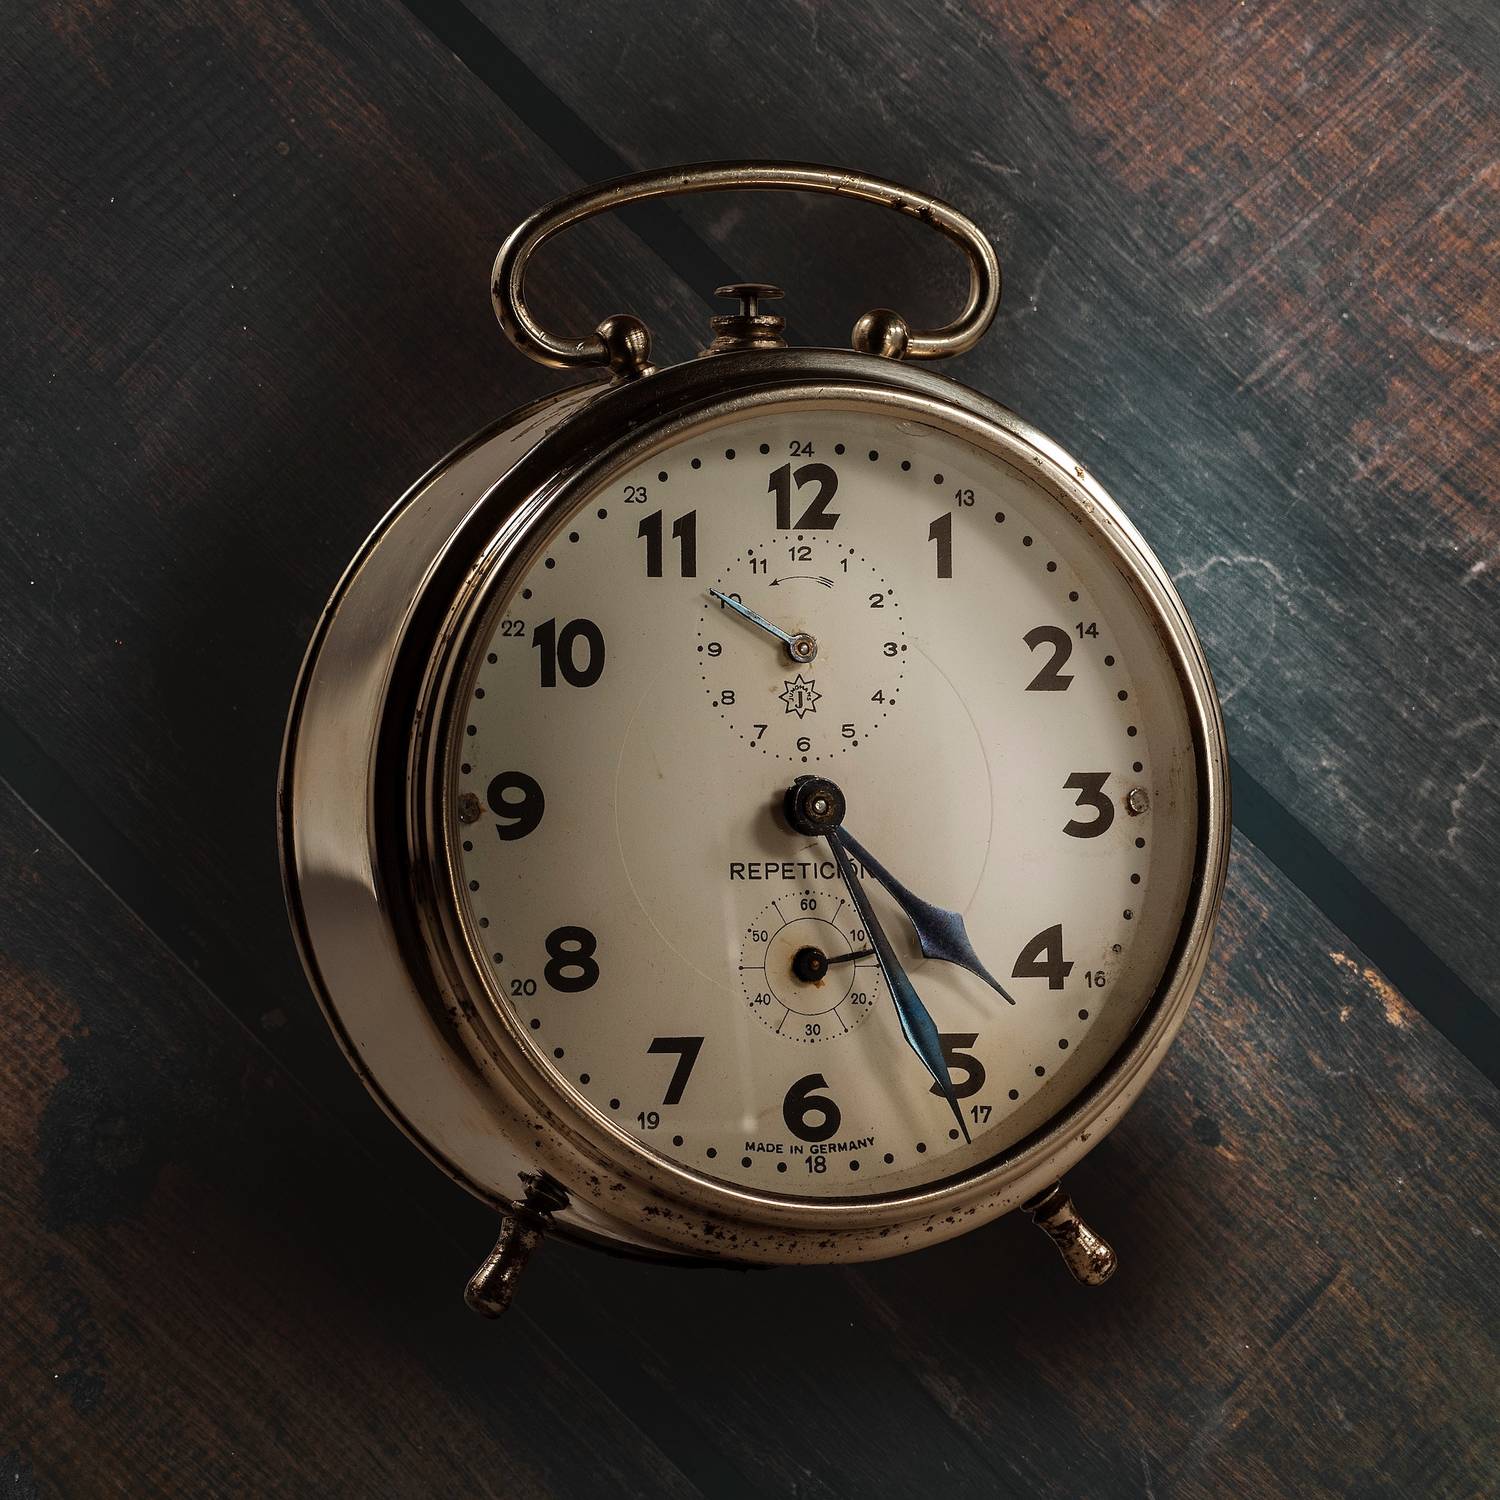 Time’s up for the billable hour: Focusing on value is now the only option